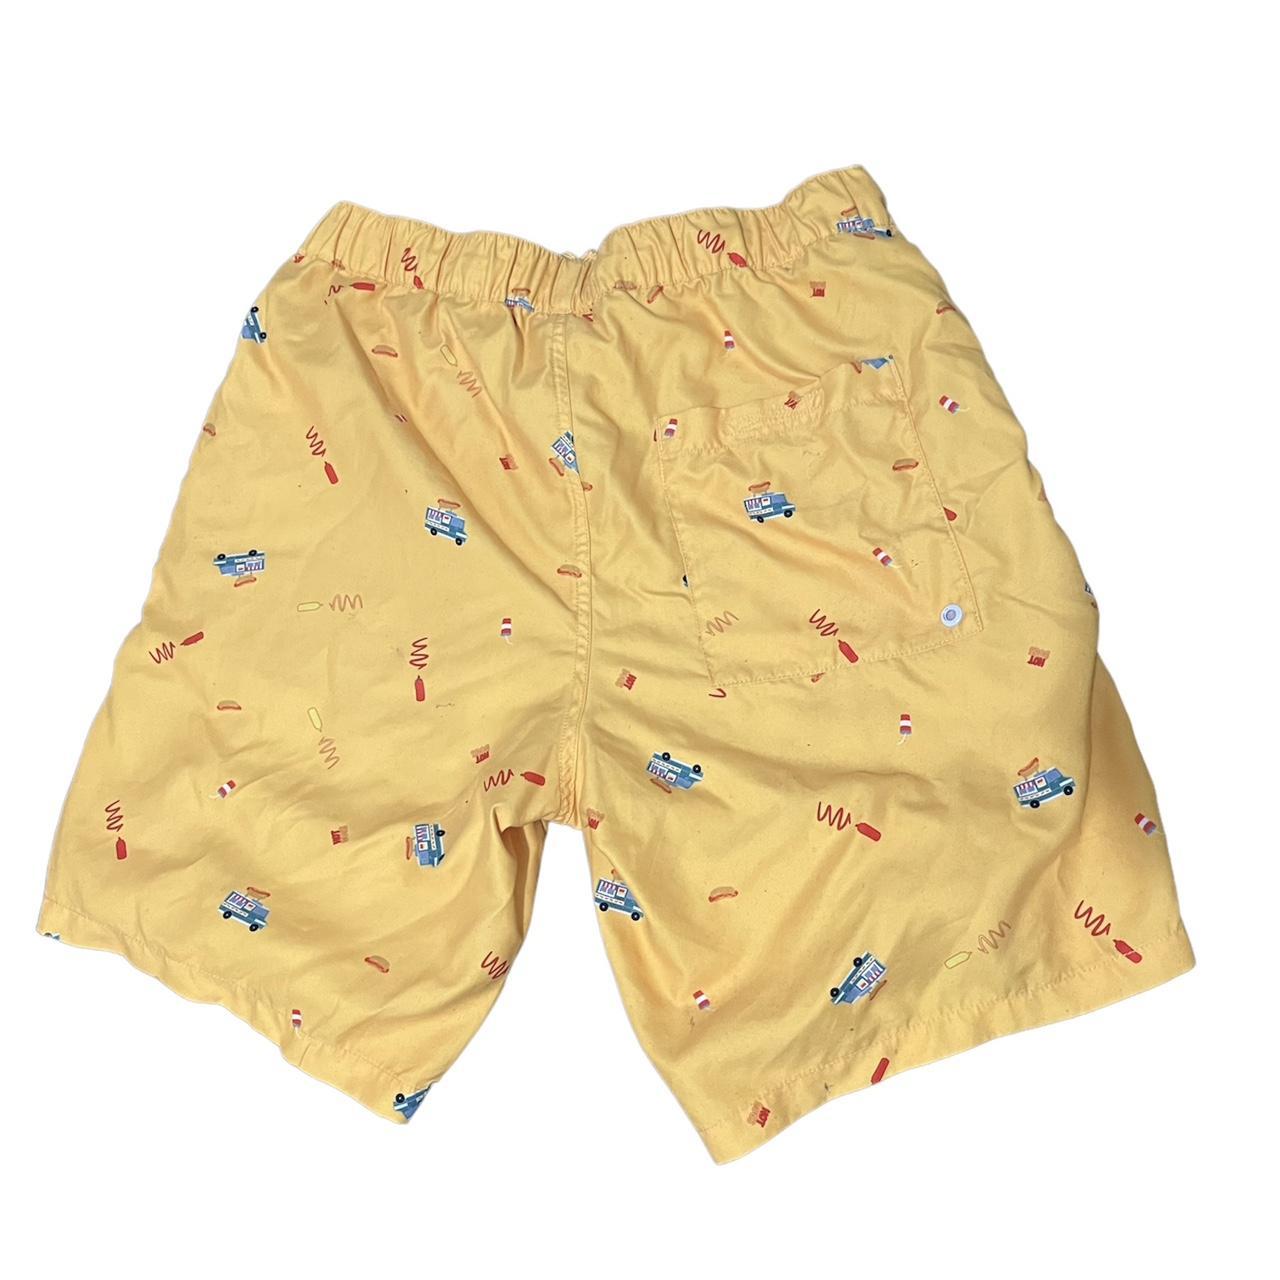 Empyre Men's Yellow and Red Swim-briefs-shorts (2)